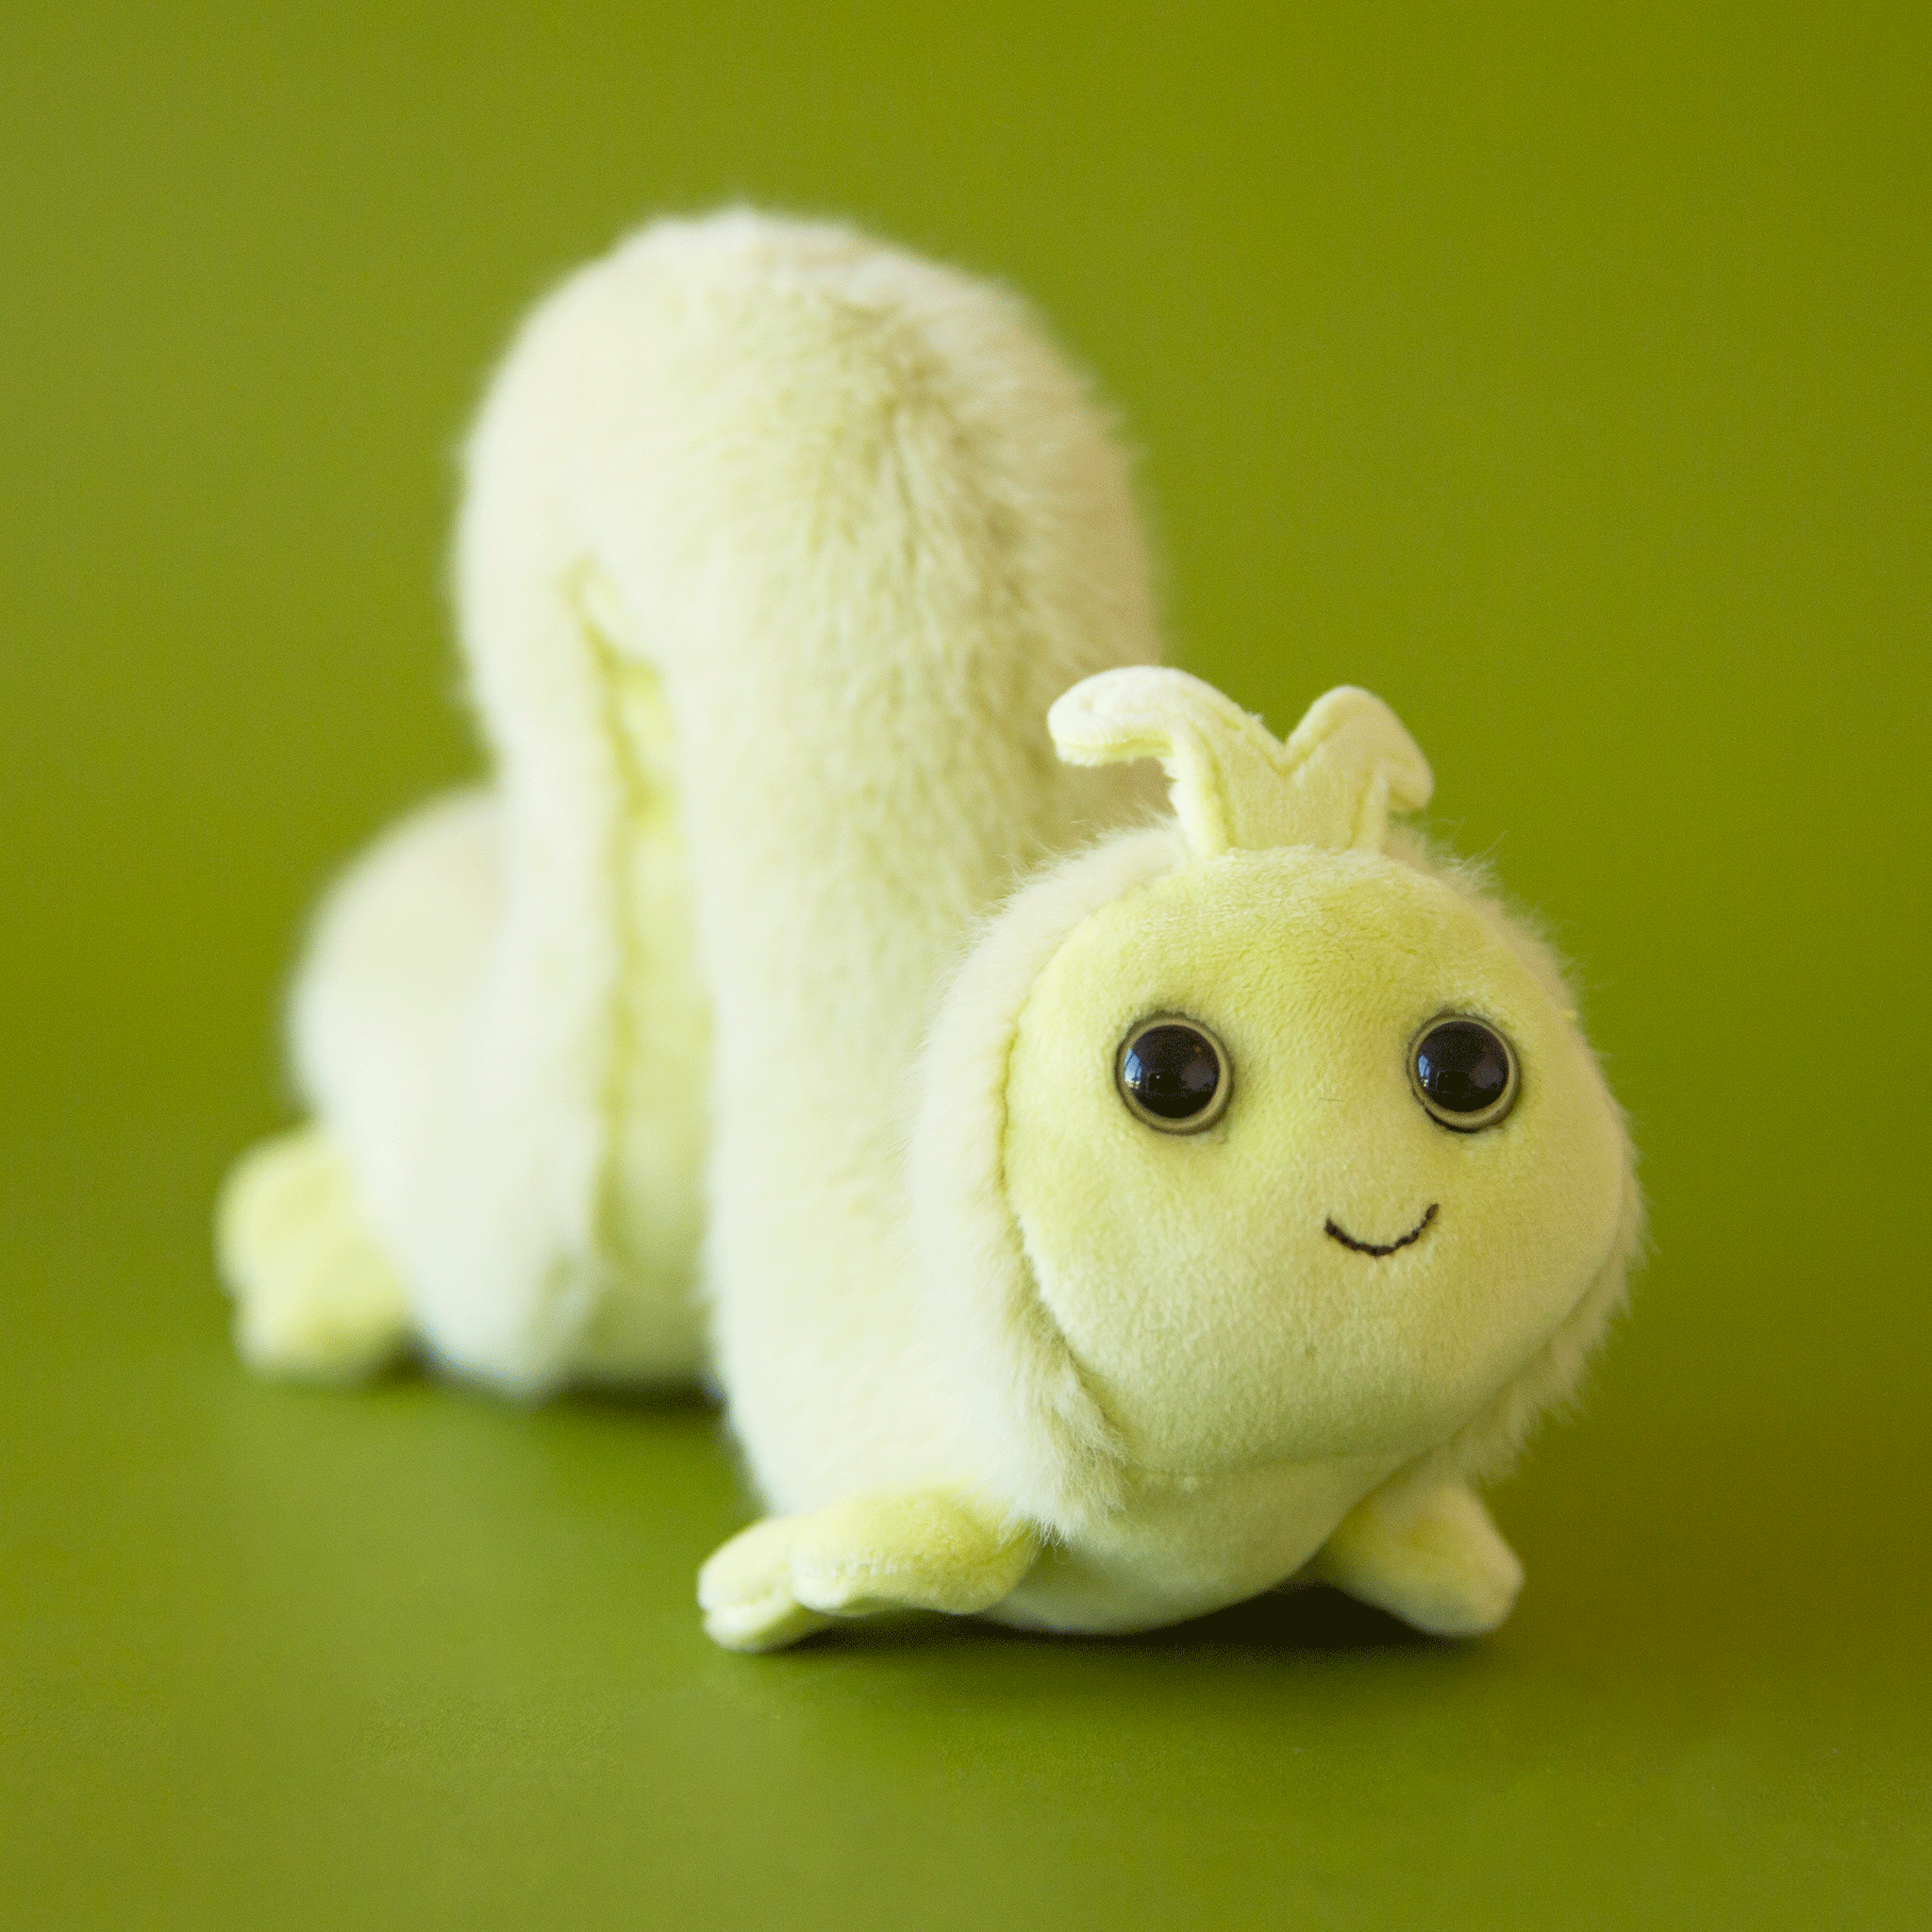 On a green background is a pastel green inchworm stuffed toy.